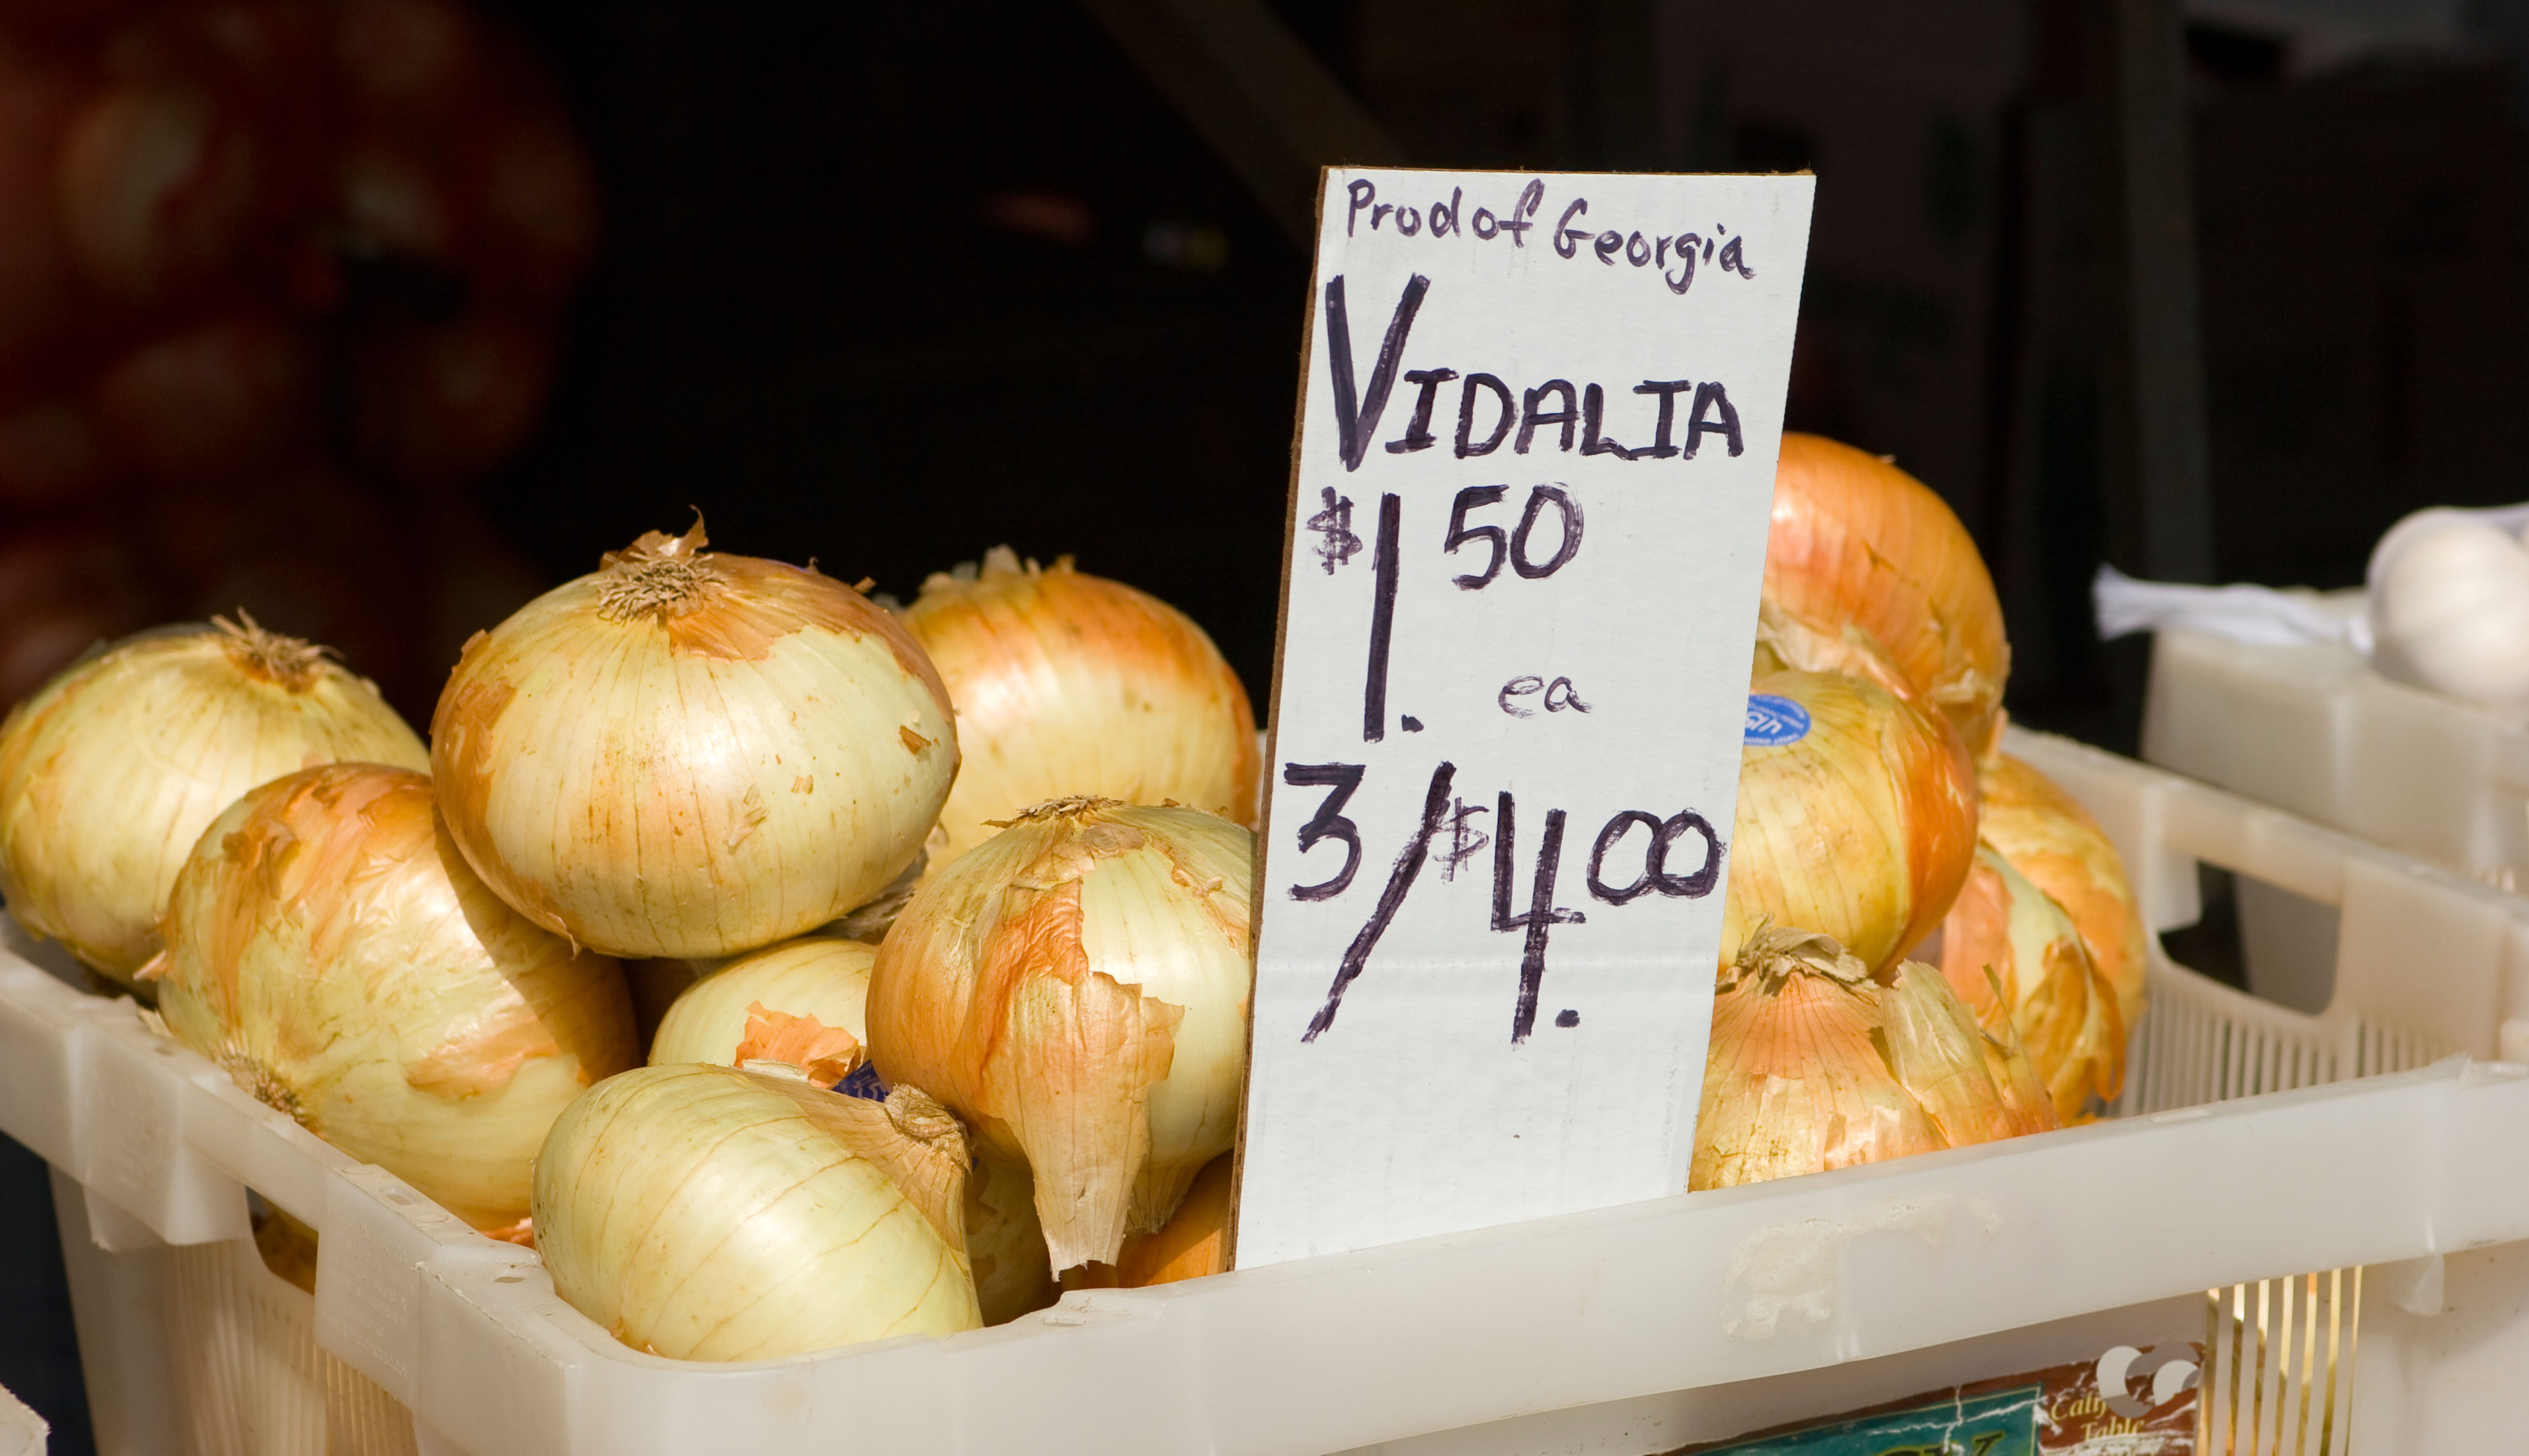 To be called Vidalias, the onions have to be grown either within a distinct geographic area.